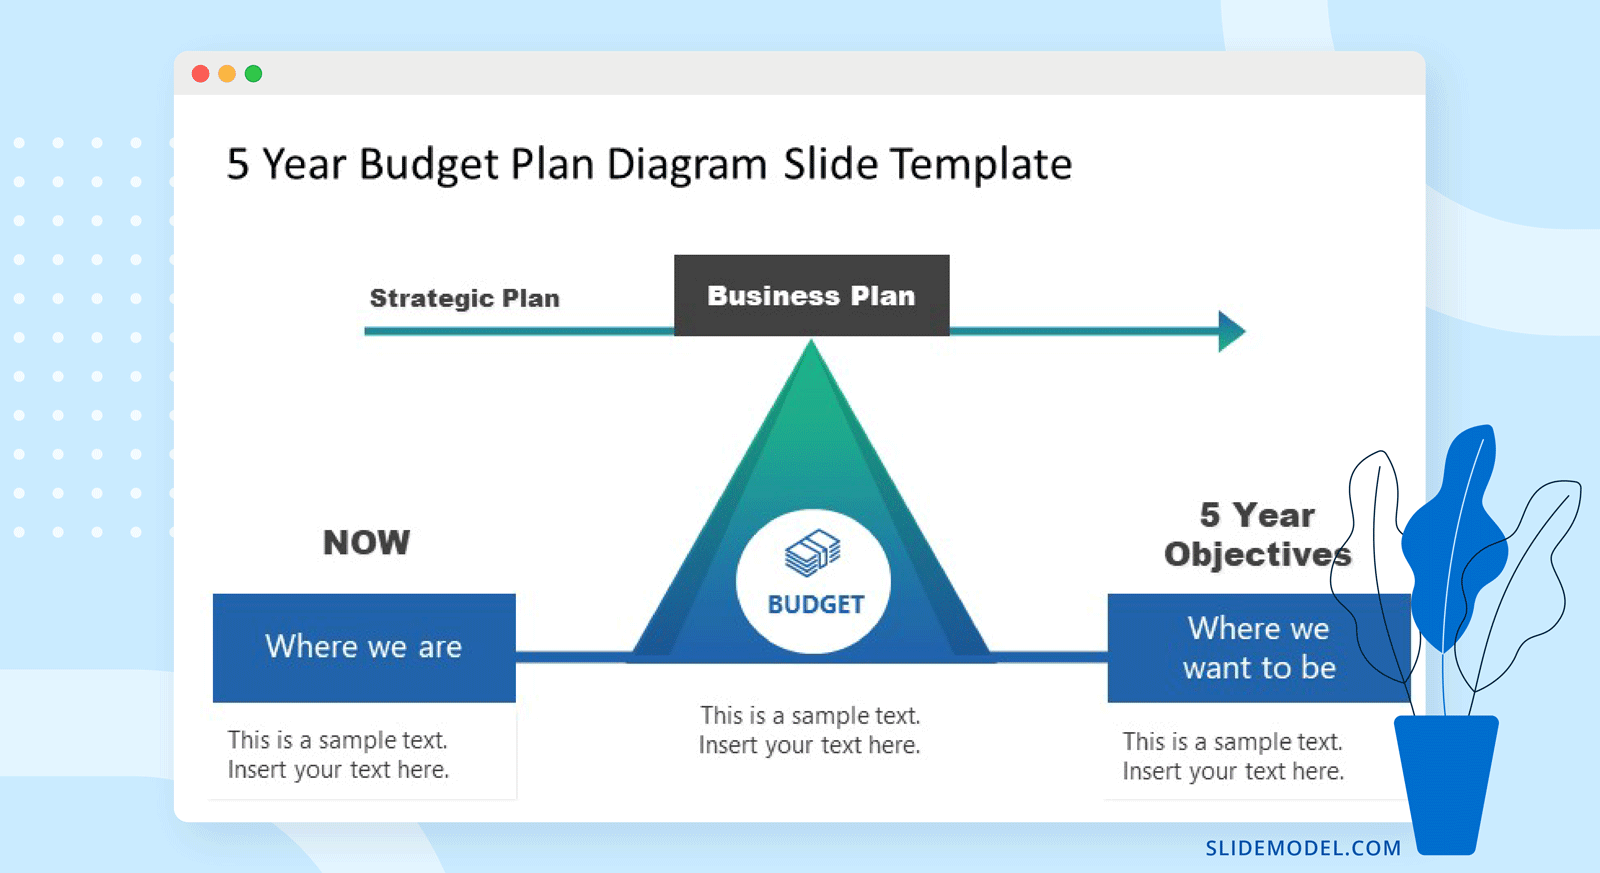 PowerPoint slide for 5-year plan in budgeting